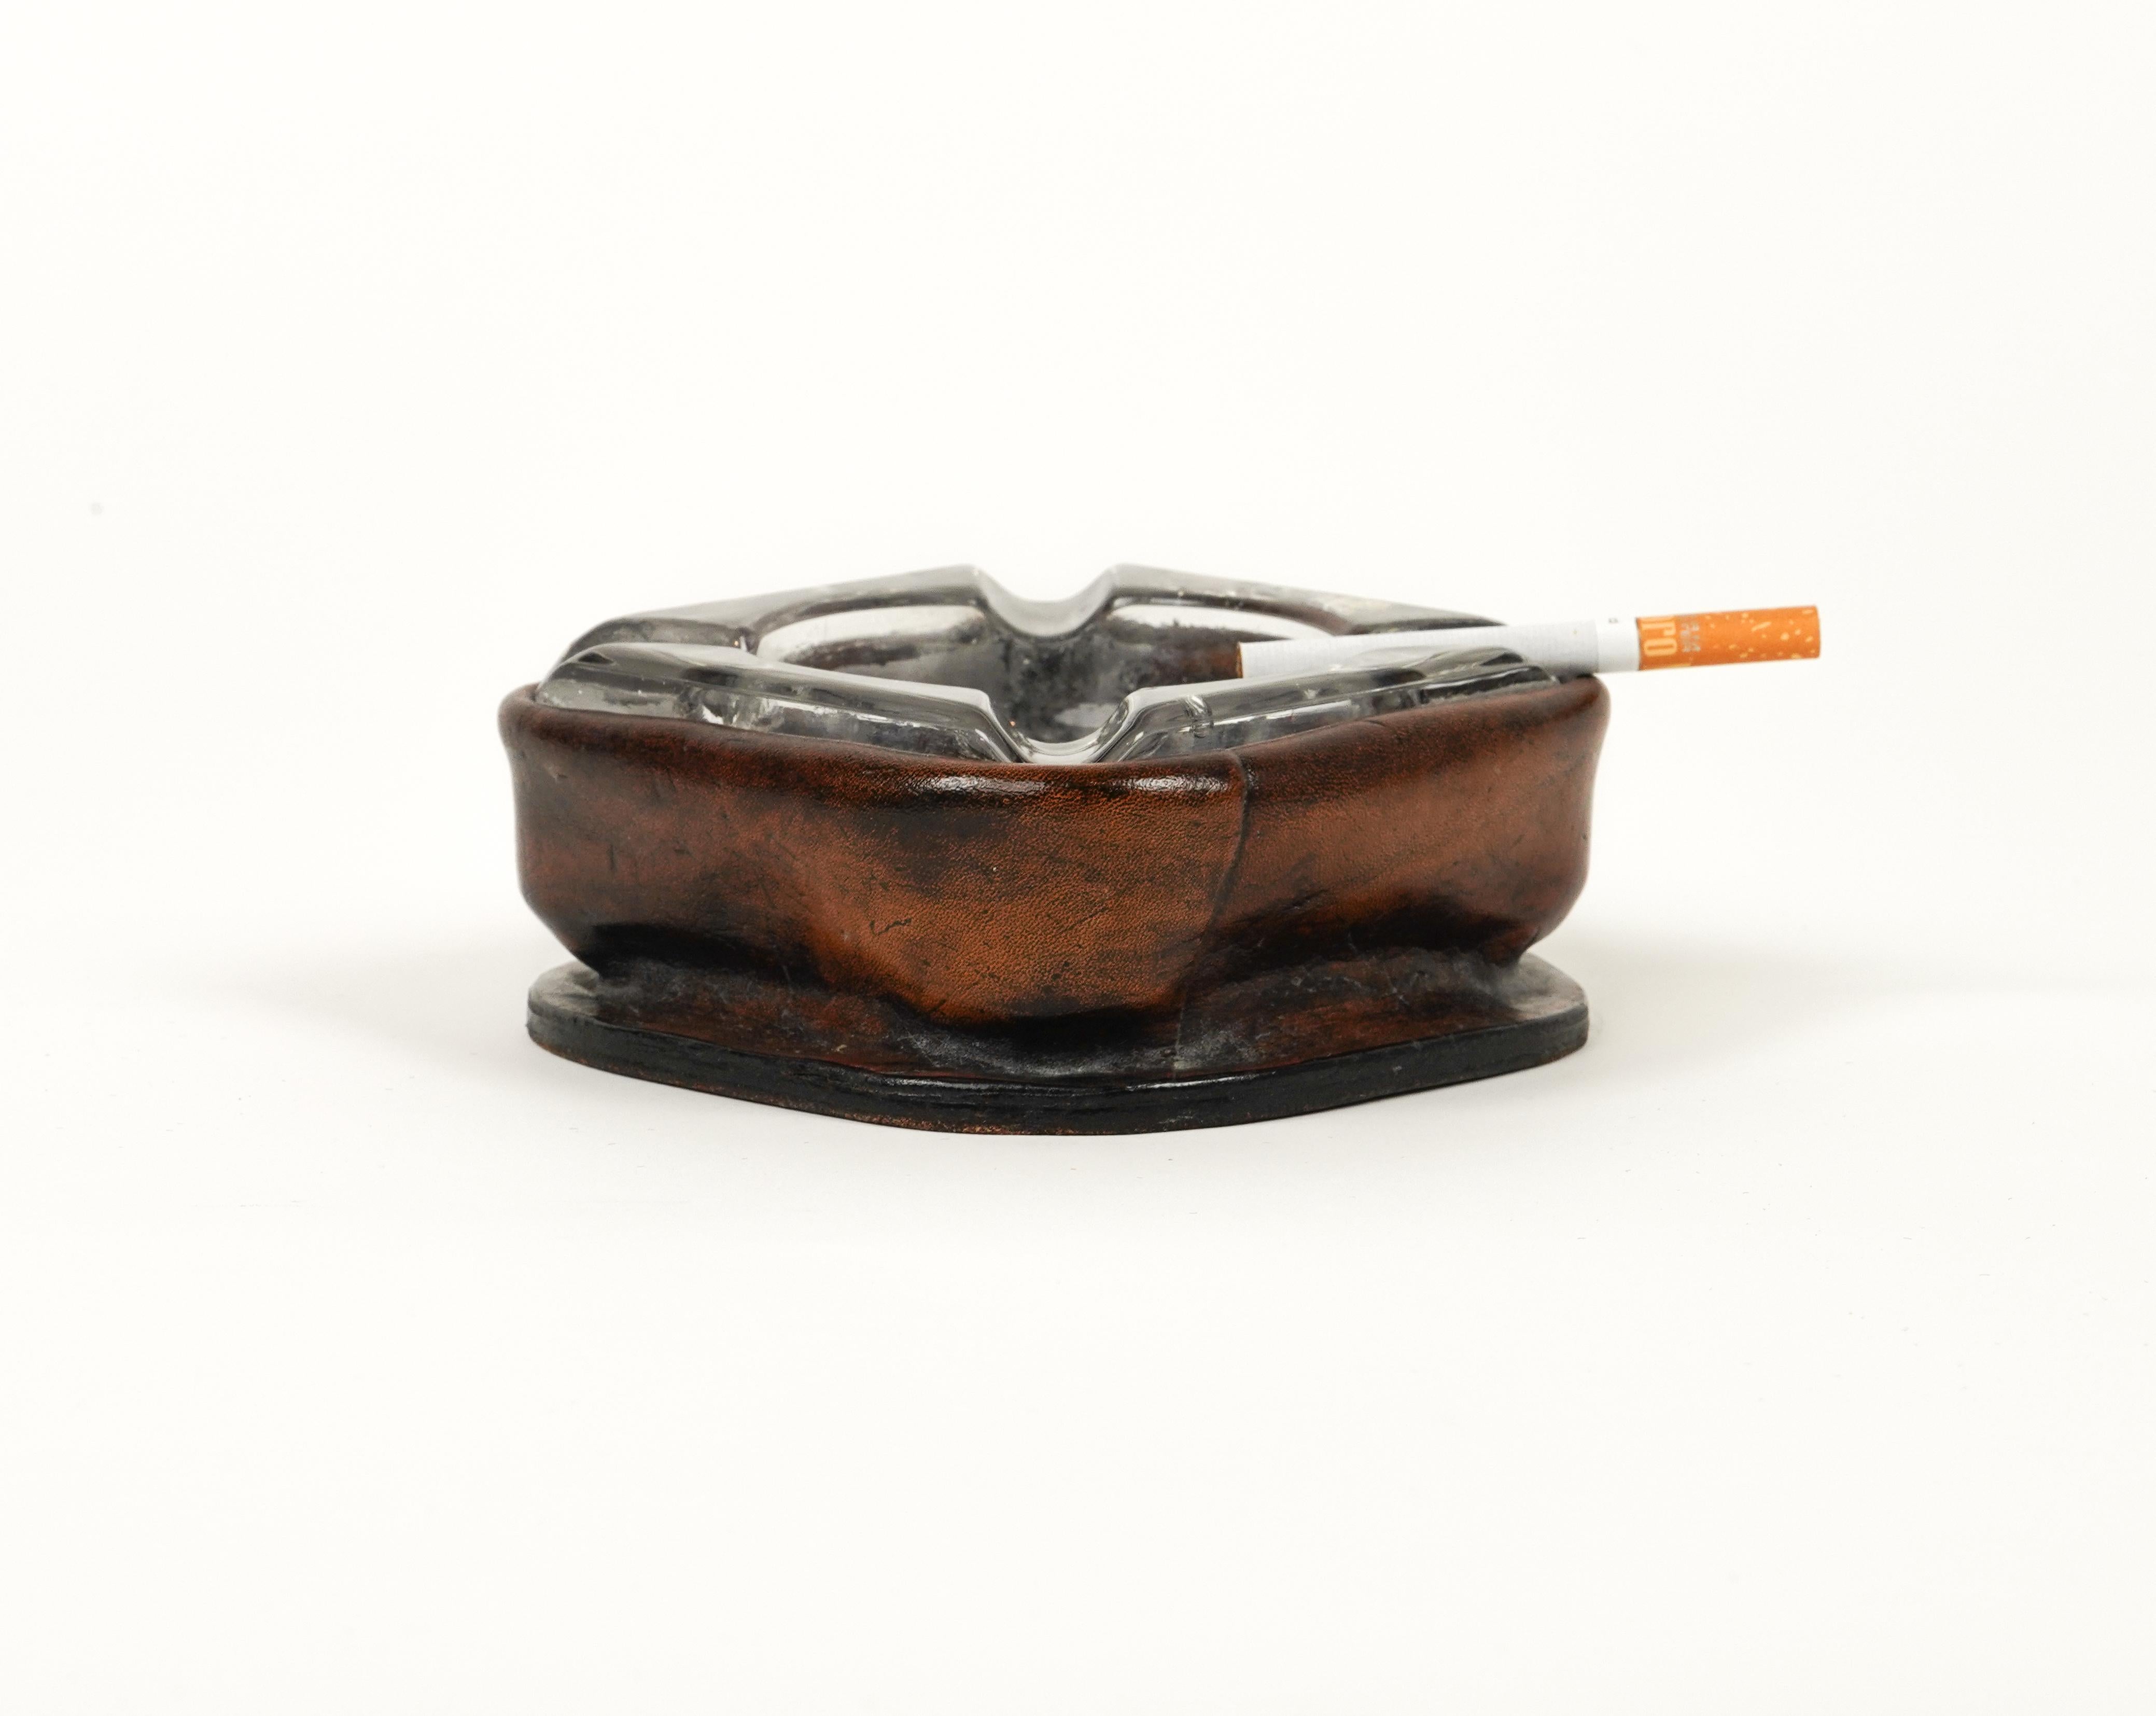 Midcentury Squared Ashtray in Leather and Glass Jacques Adnet Style, Italy 1970s For Sale 3